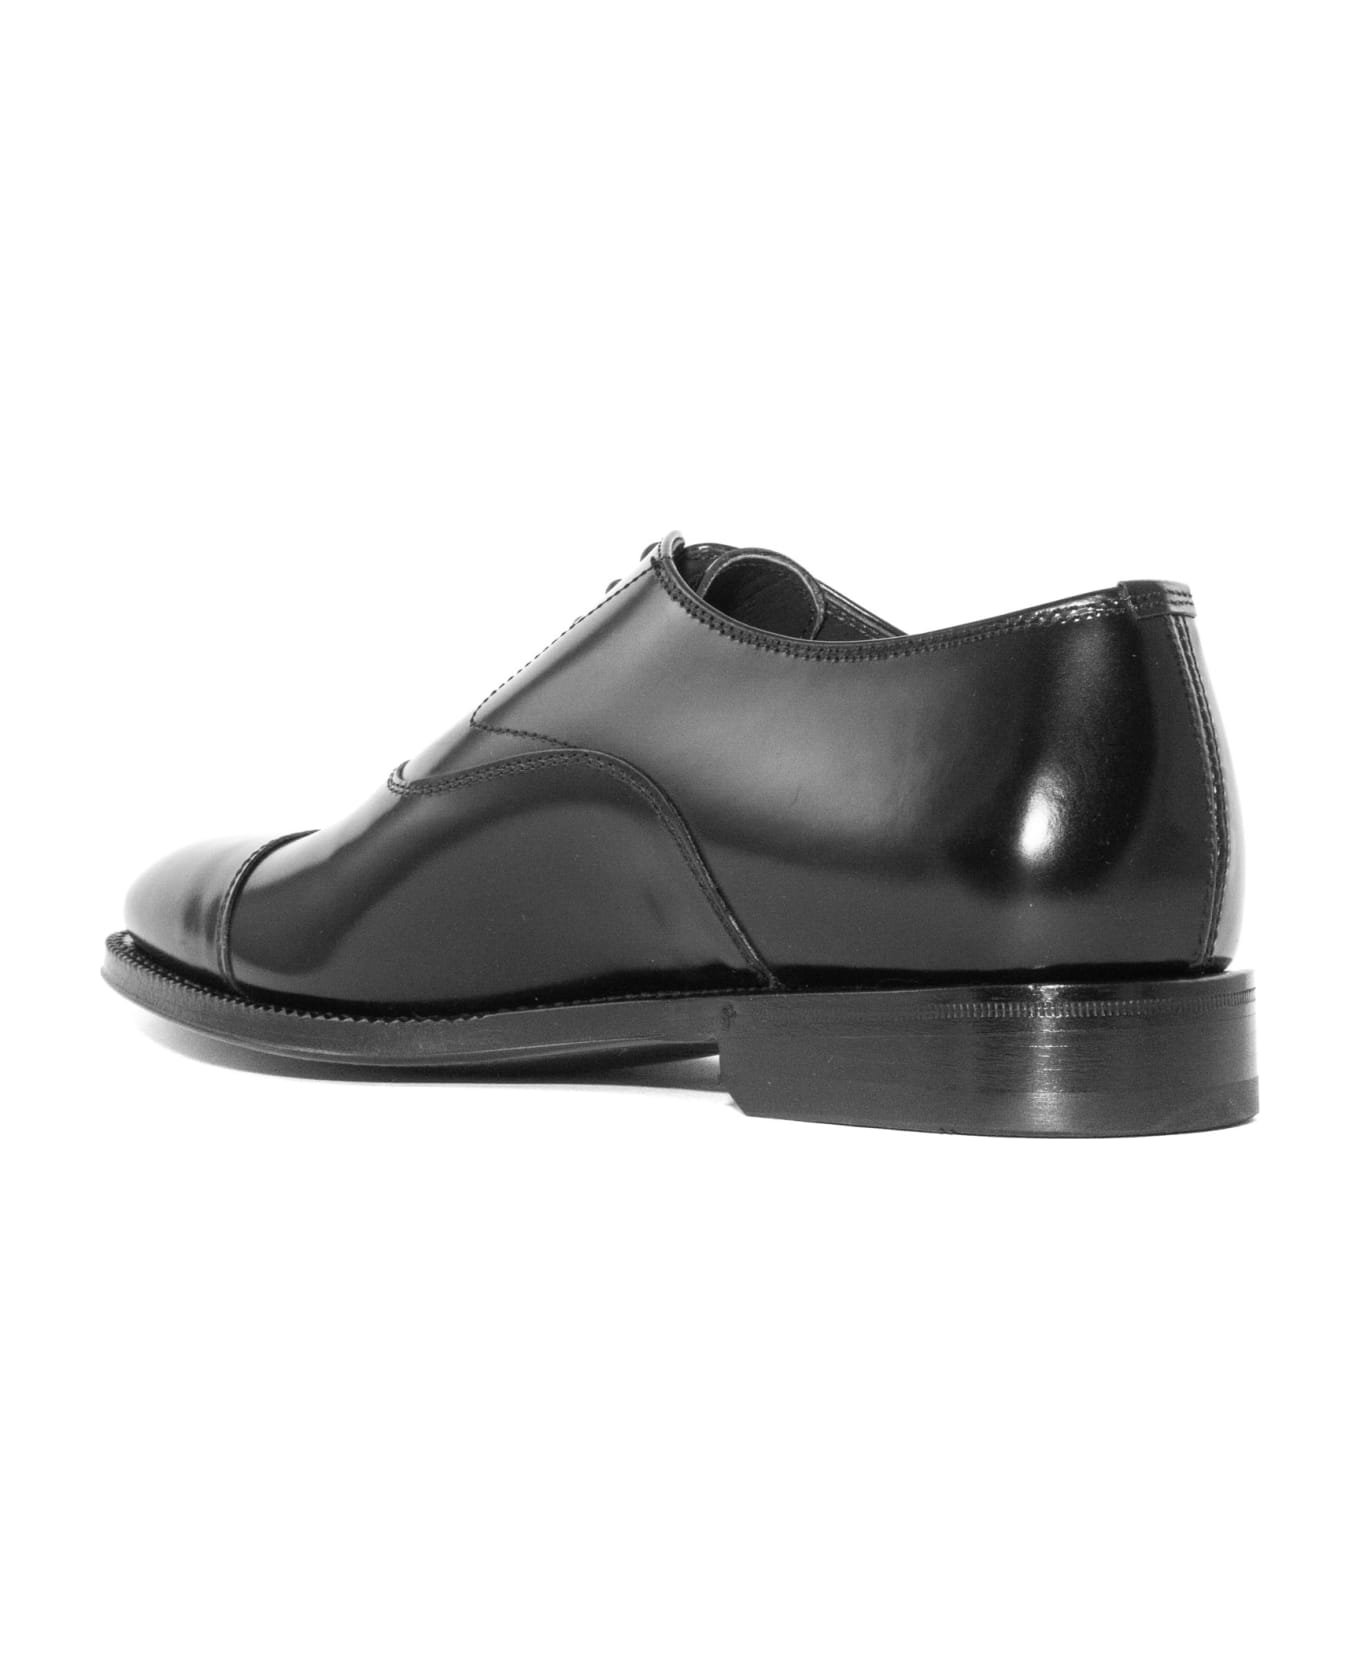 Green George Black Brushed Leather Oxford Armour Shoes - Black